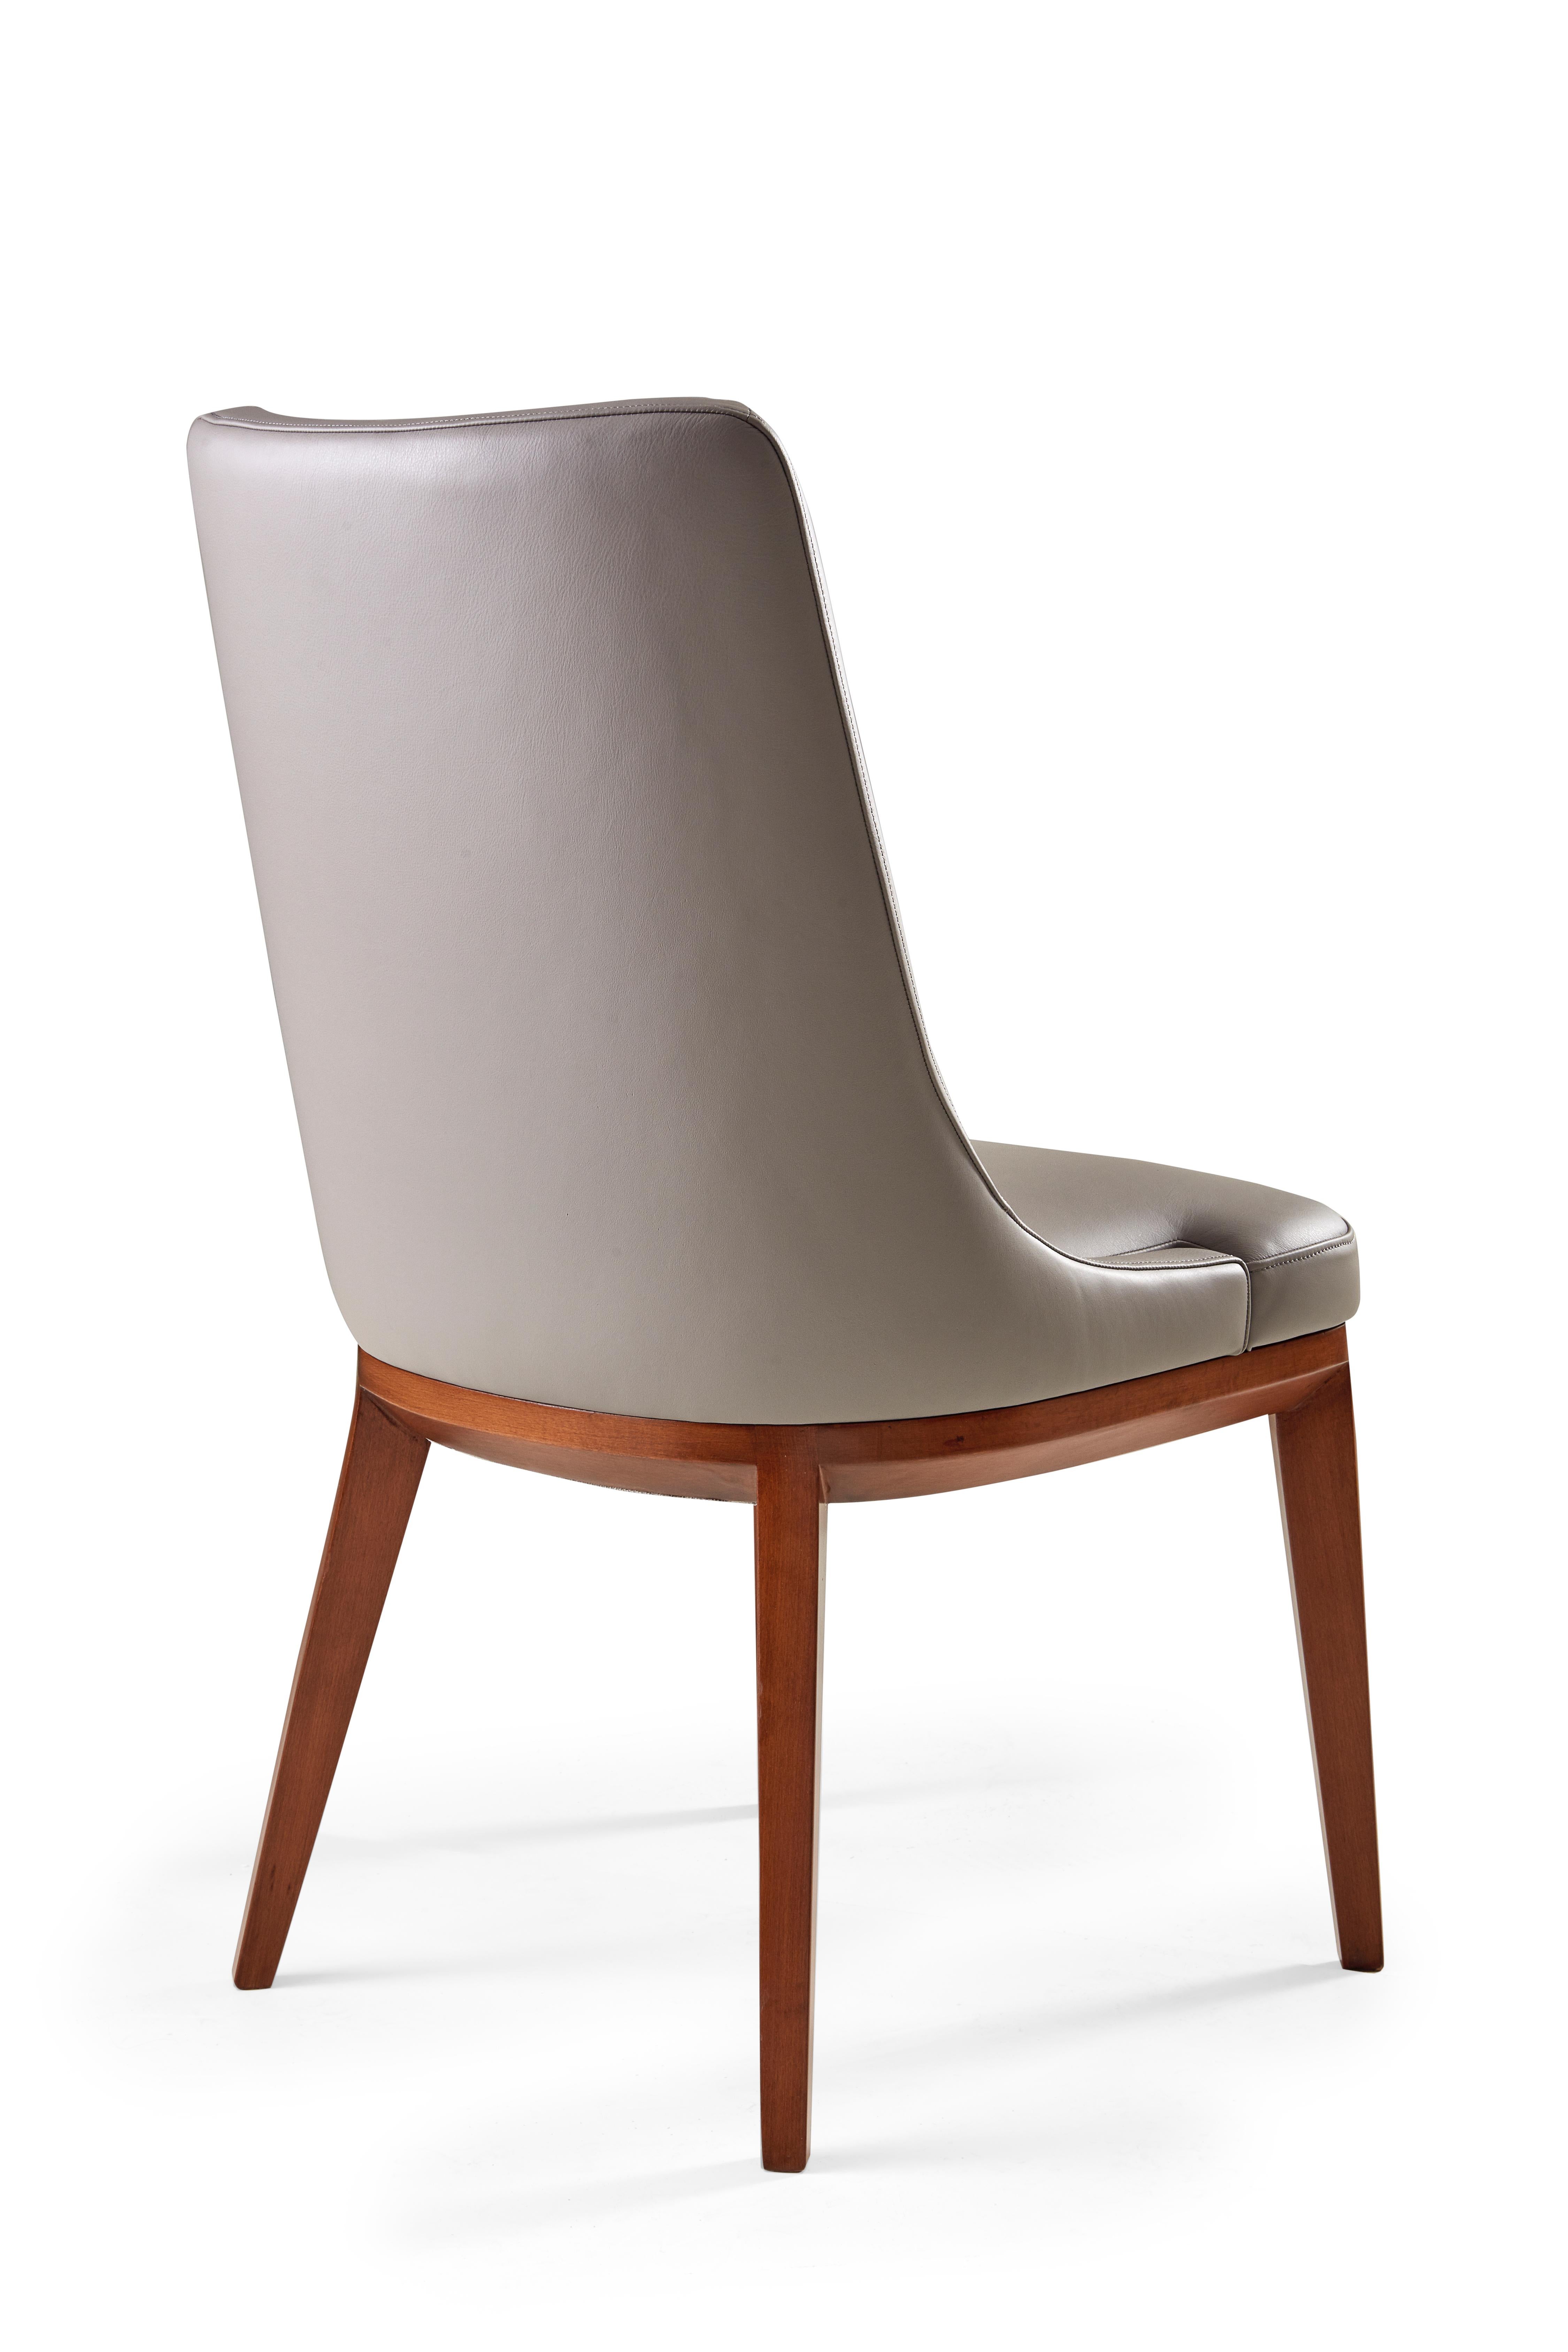 There is beauty in such simplicity. This tight upholstered chair on wood legs features a clean design with high style. Use leather for a more modern look, or soften with one of our many soft to the touch fabrics.